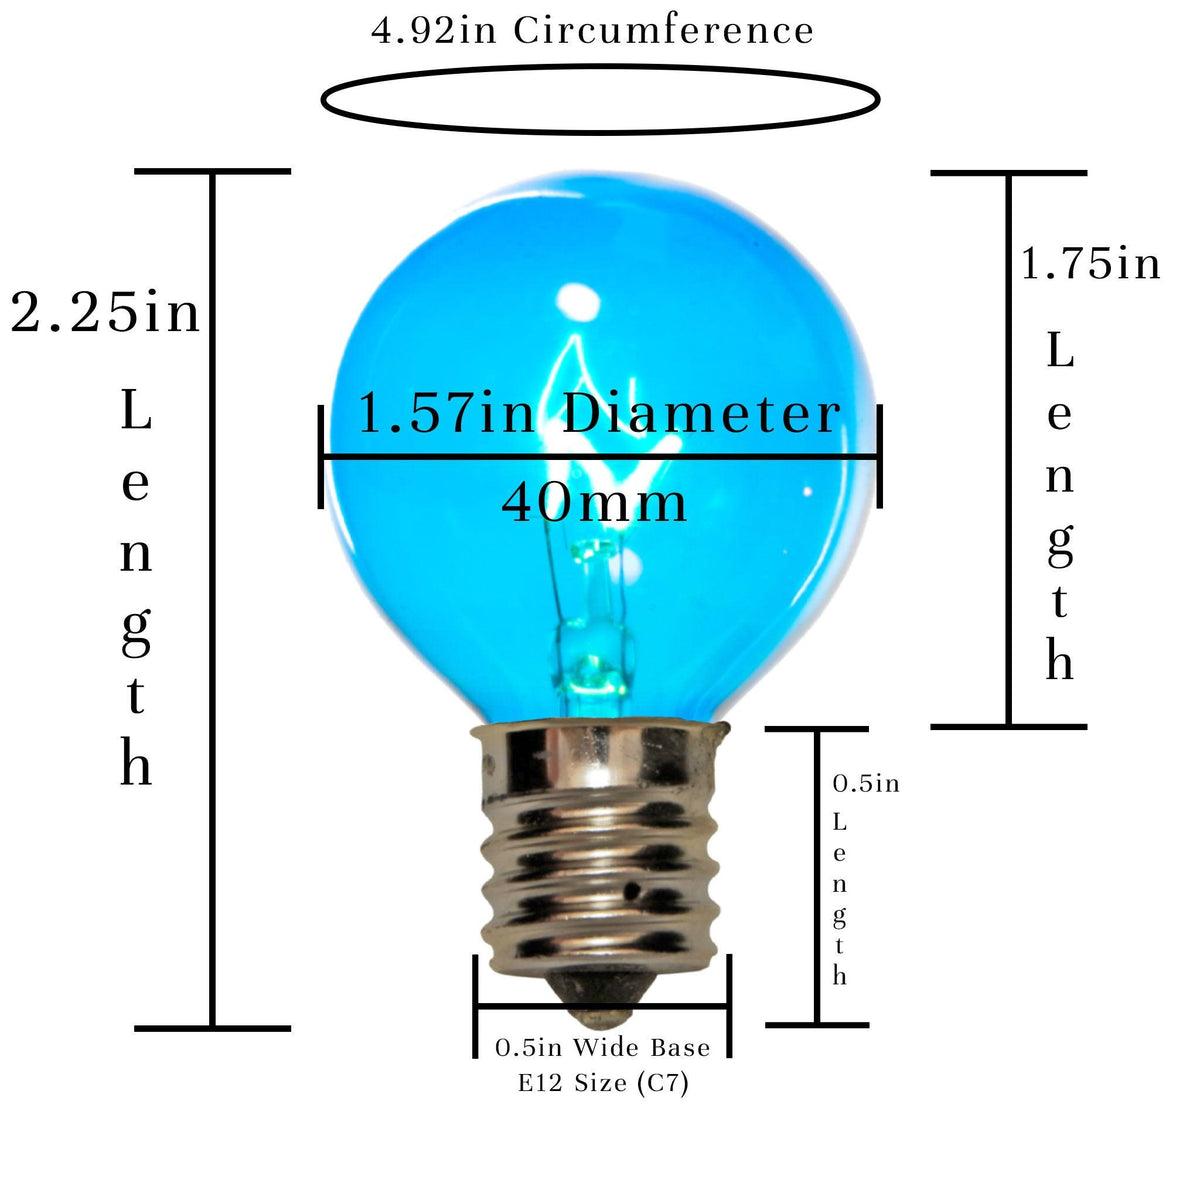 Size and Dimensions of a G40 Light Bulb. Available for sale at leedisplay.com